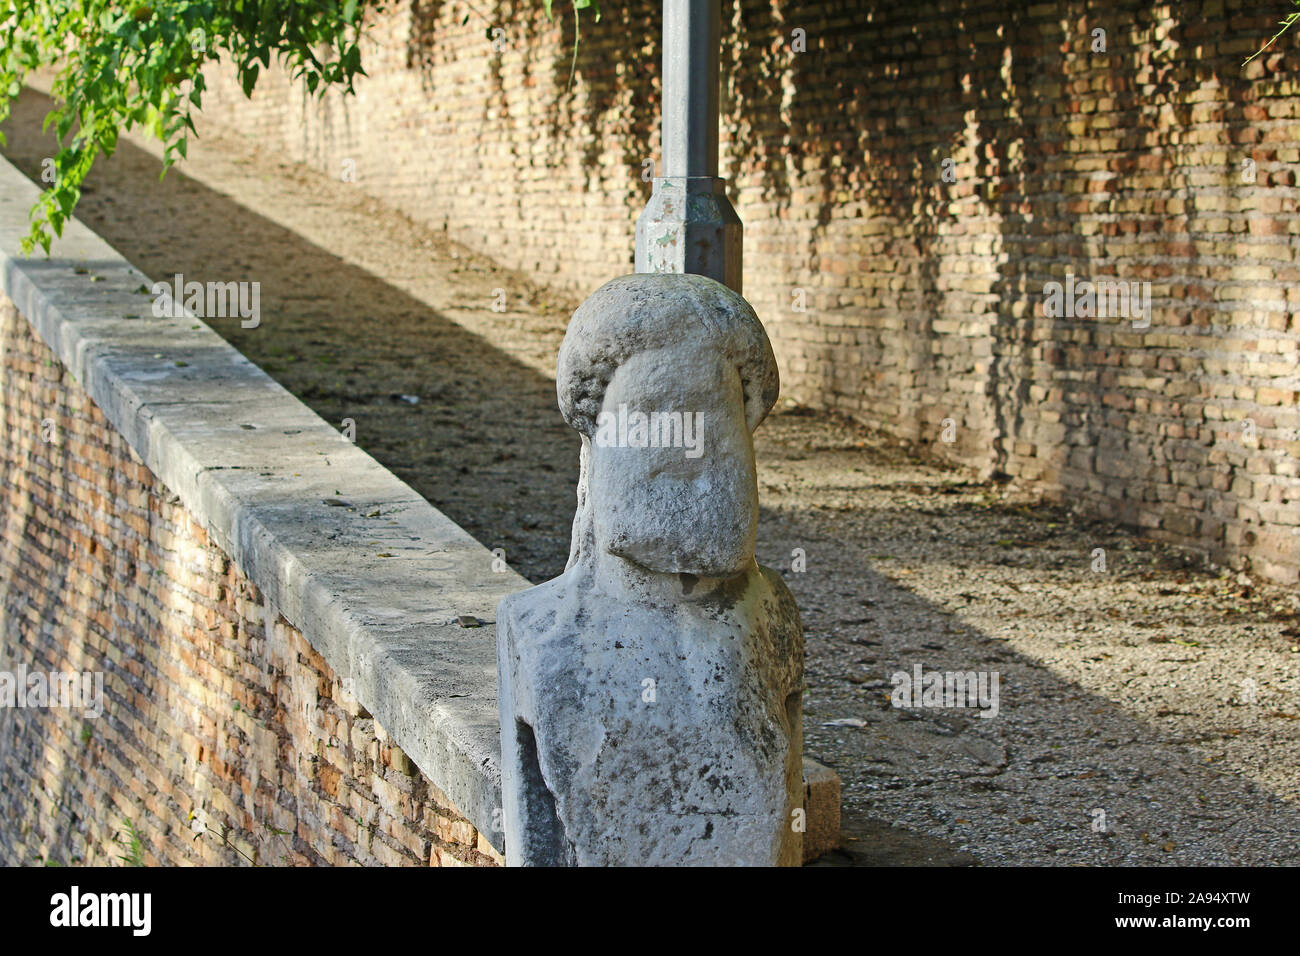 An ancient Roman weather worn or weather-beaten stone statue at the bottom of stone steps leading towards the Villa Borghese park in Rome Stock Photo